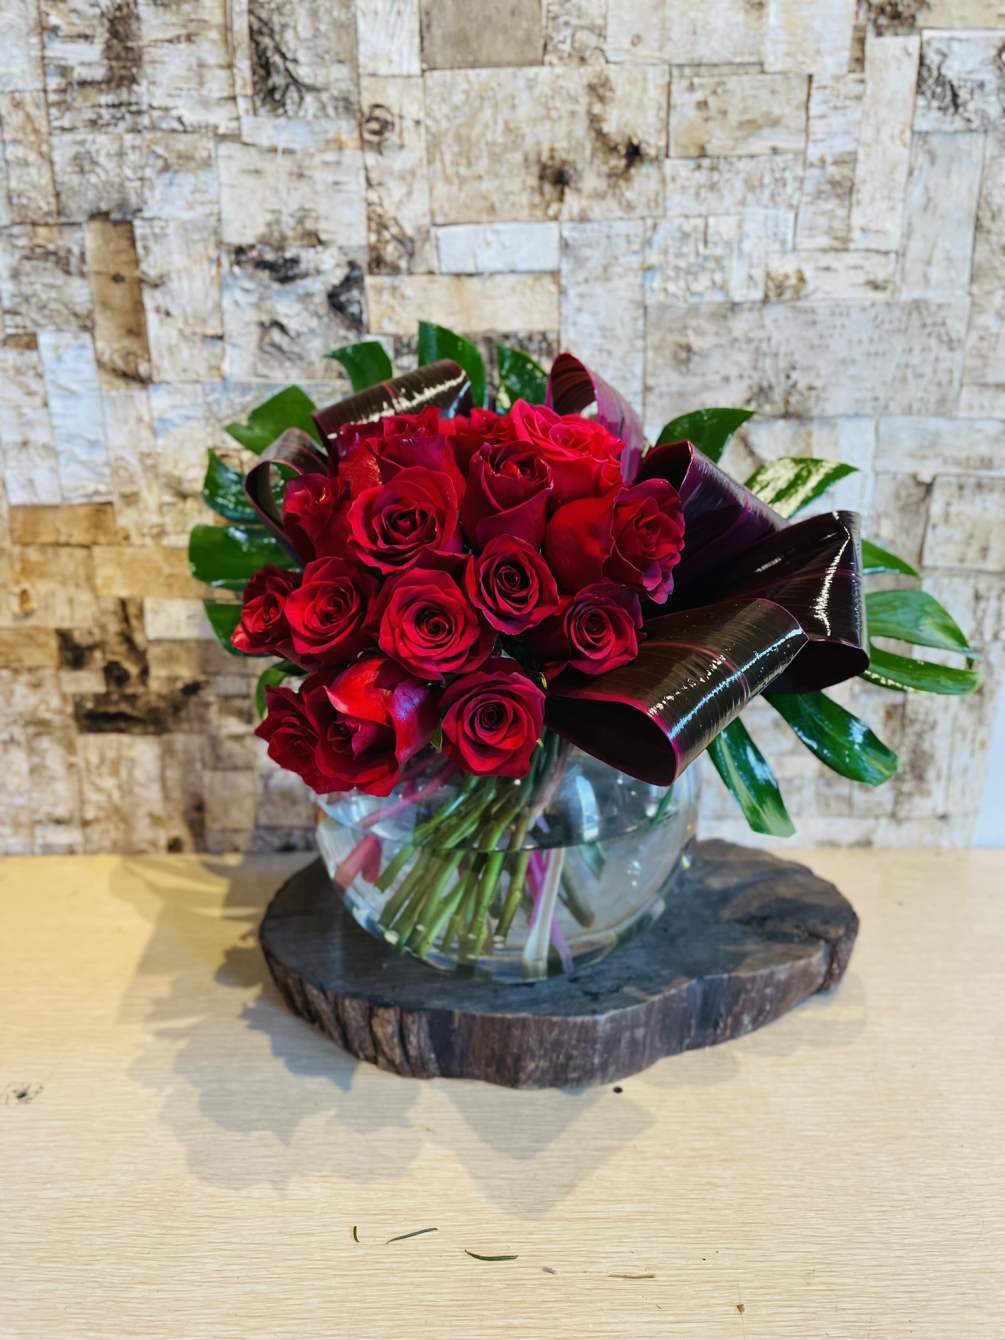 Make a lasting impressions with this beautiful arrangement consisting of 3 dozen